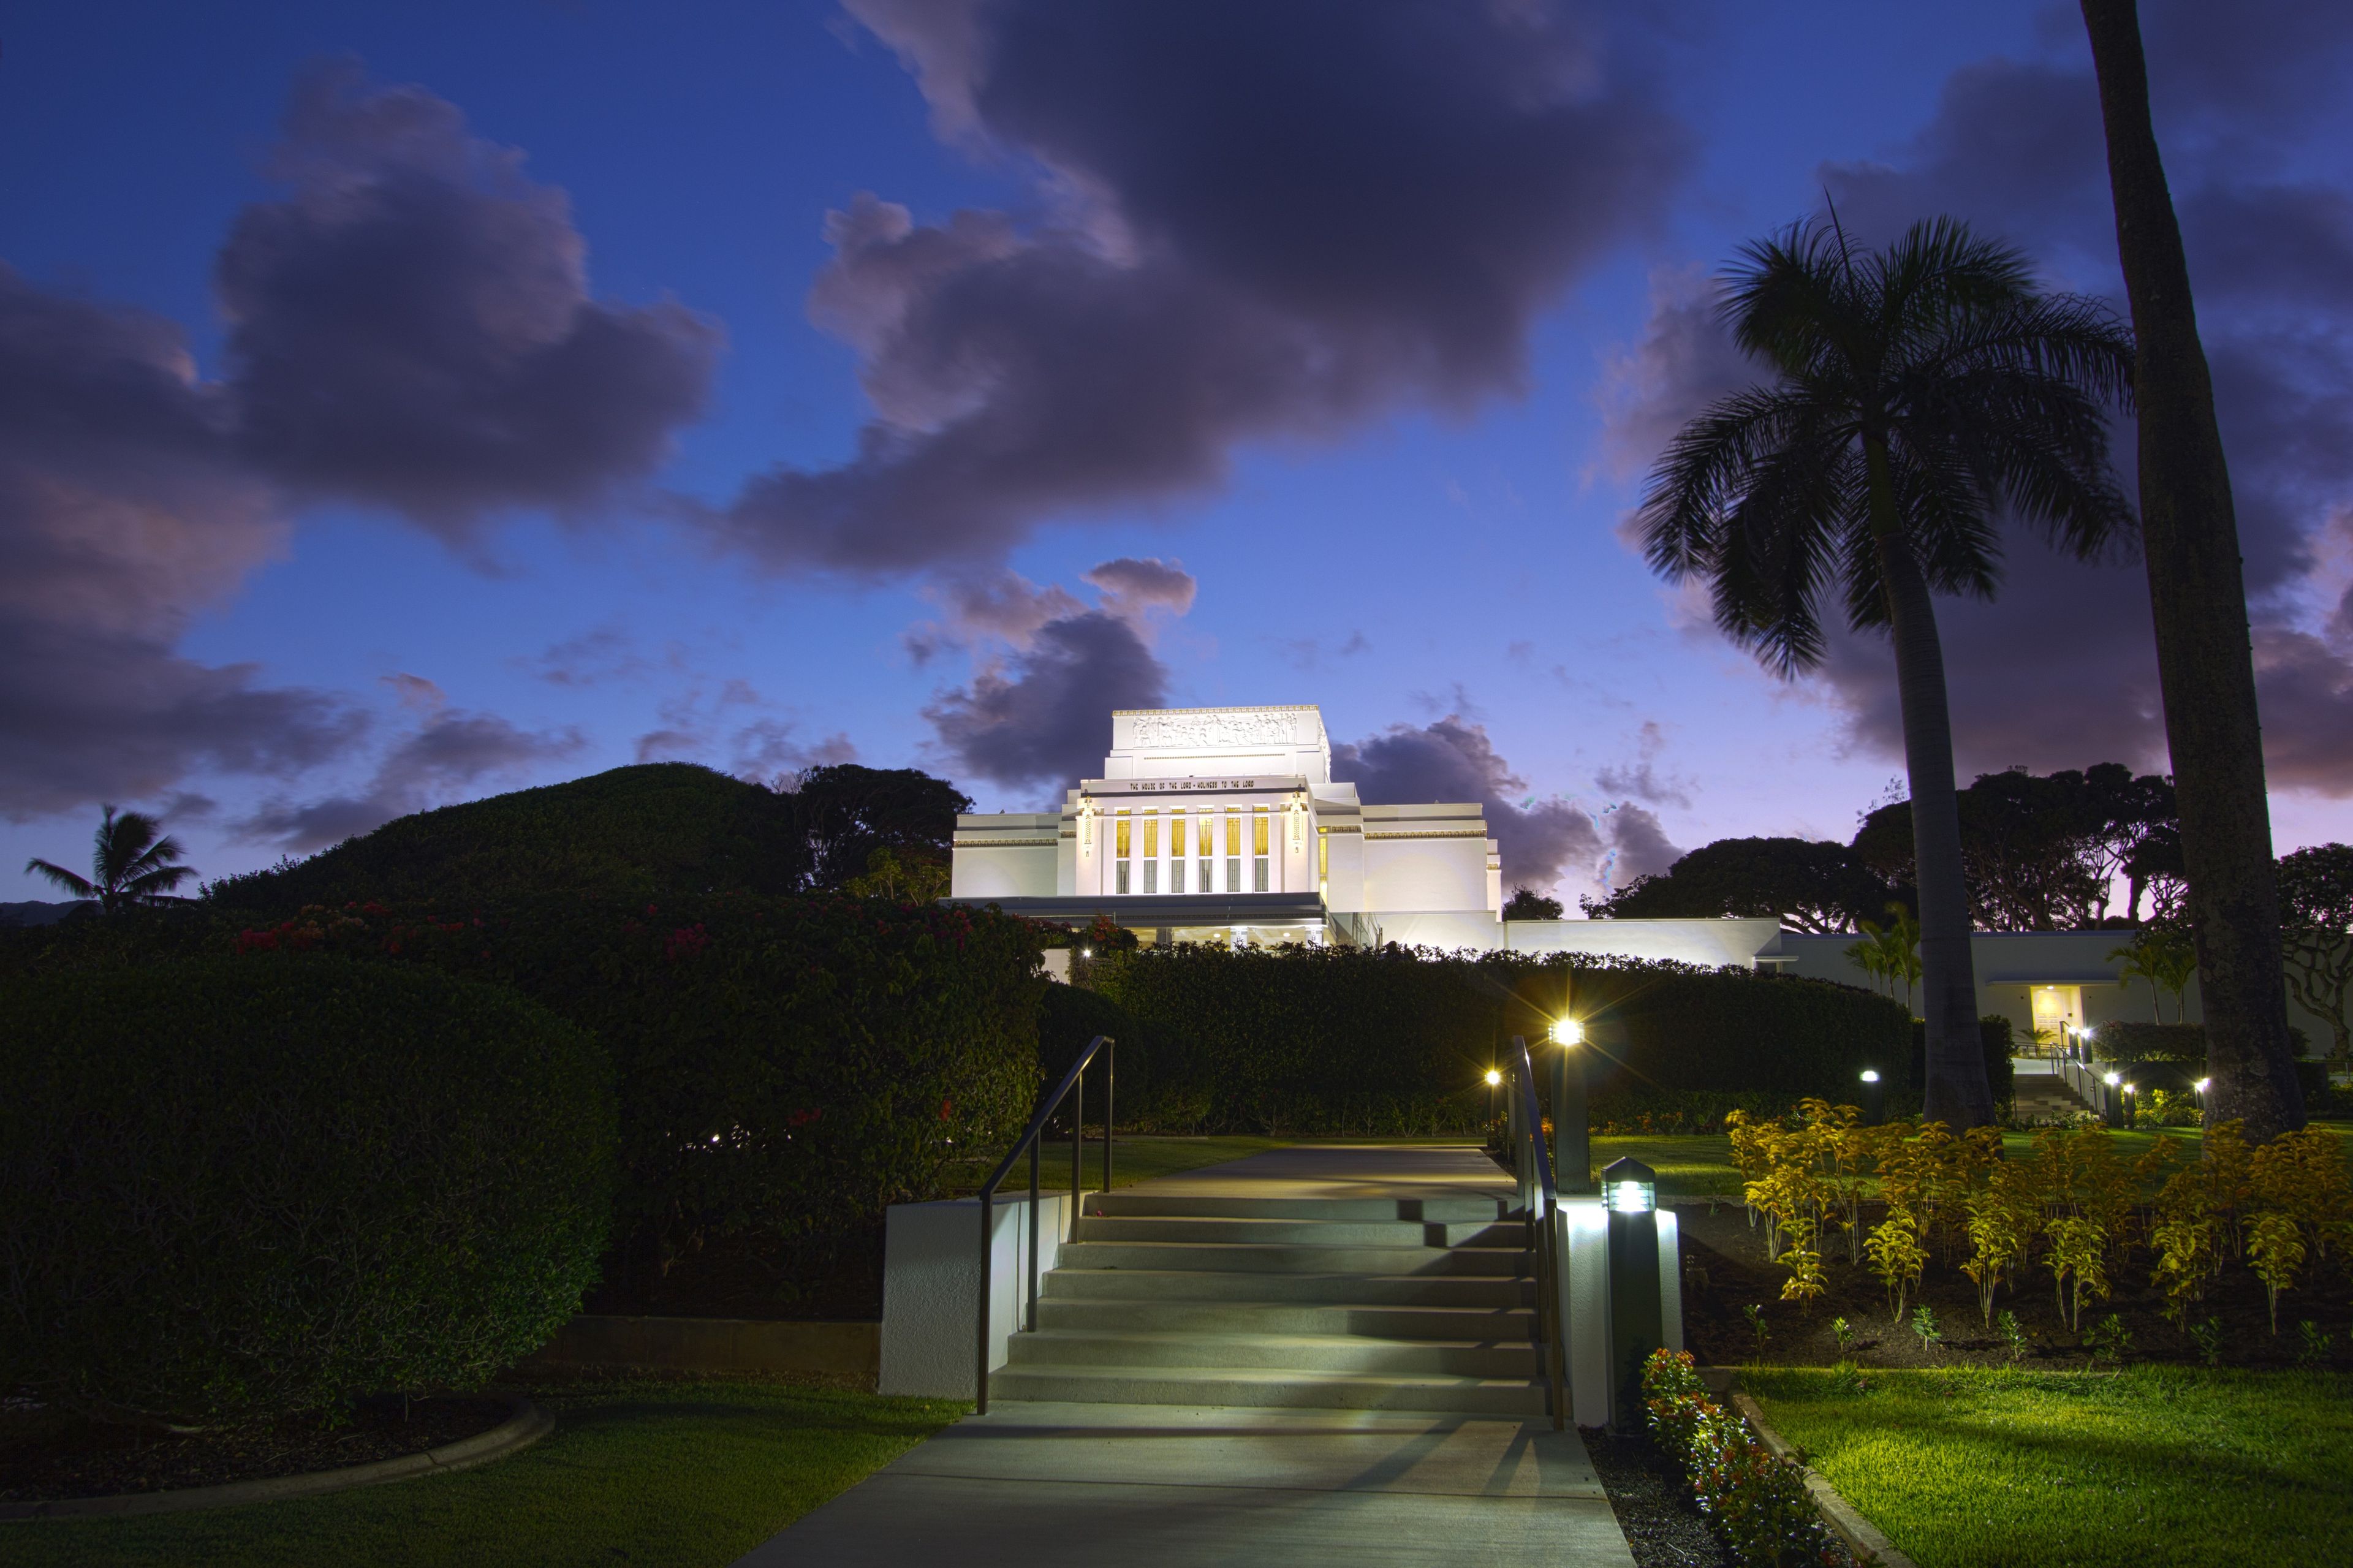 The Laie Hawaii Temple in the evening, including scenery and stairs that lead up to the temple.